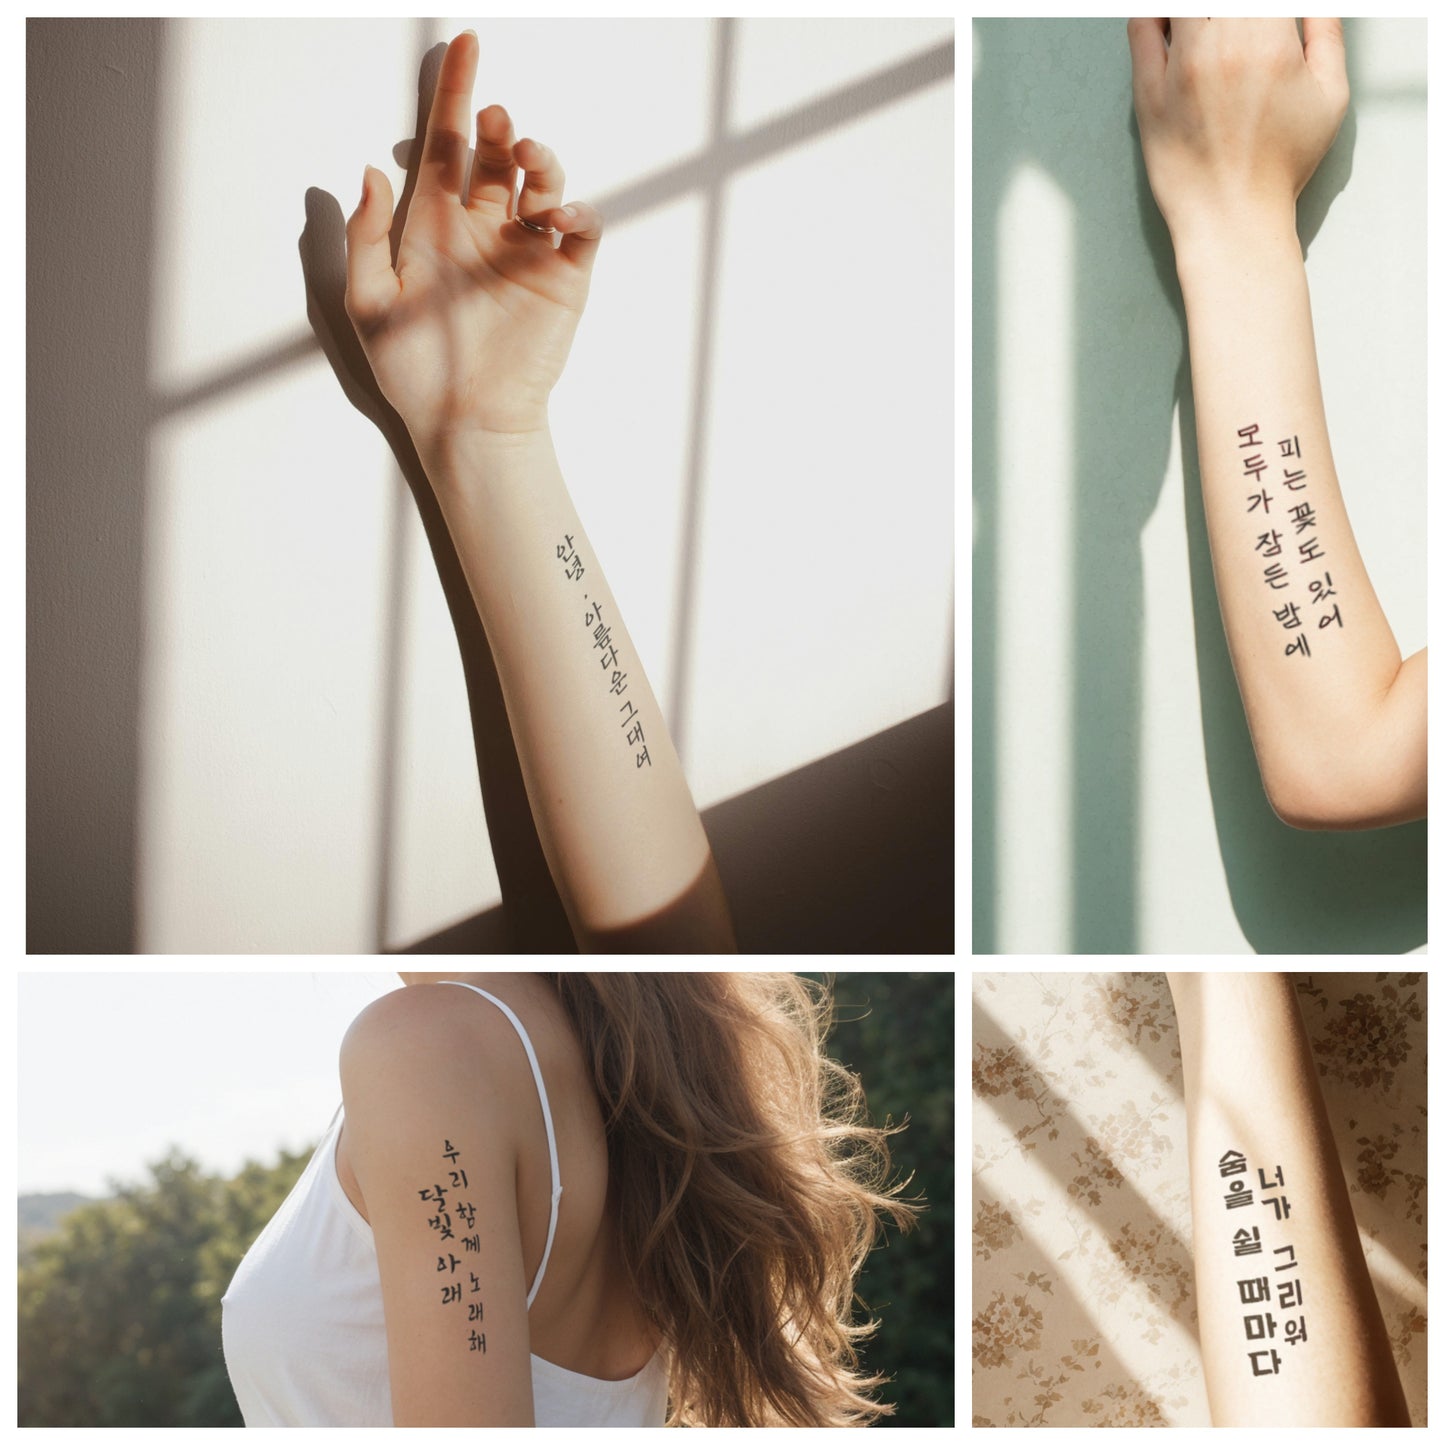 A collage of images showing arms with literary Korean temporary tattoos in various poses—against a shadowy window, on a floral background, and with a windswept hairstyle.